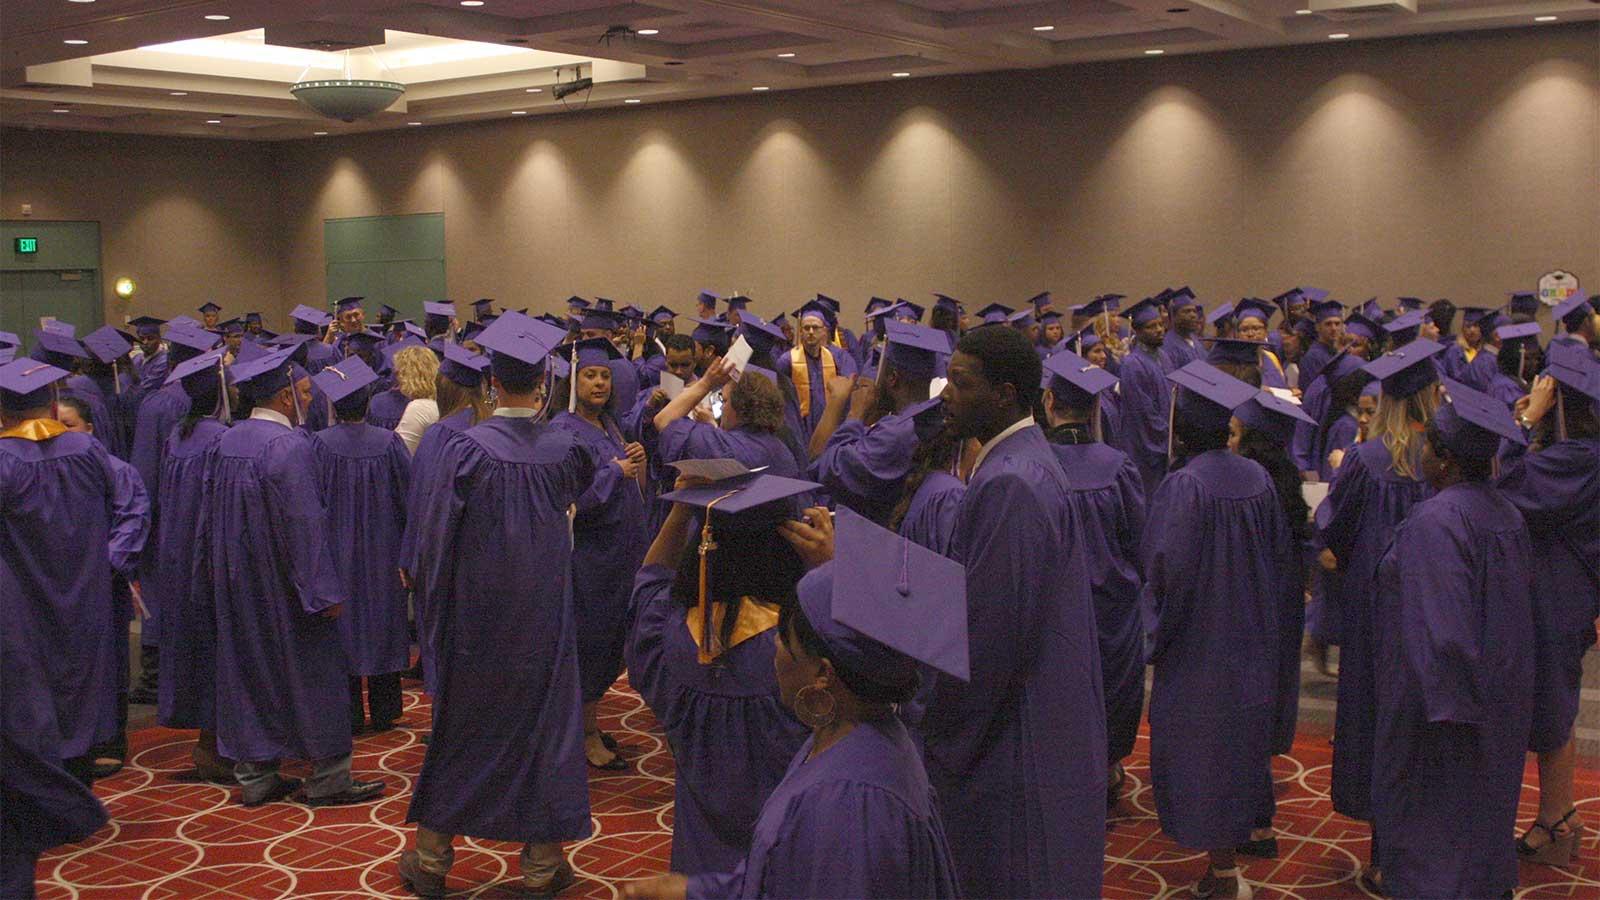 Students with their graduation gowns on waiting to line up and graduate